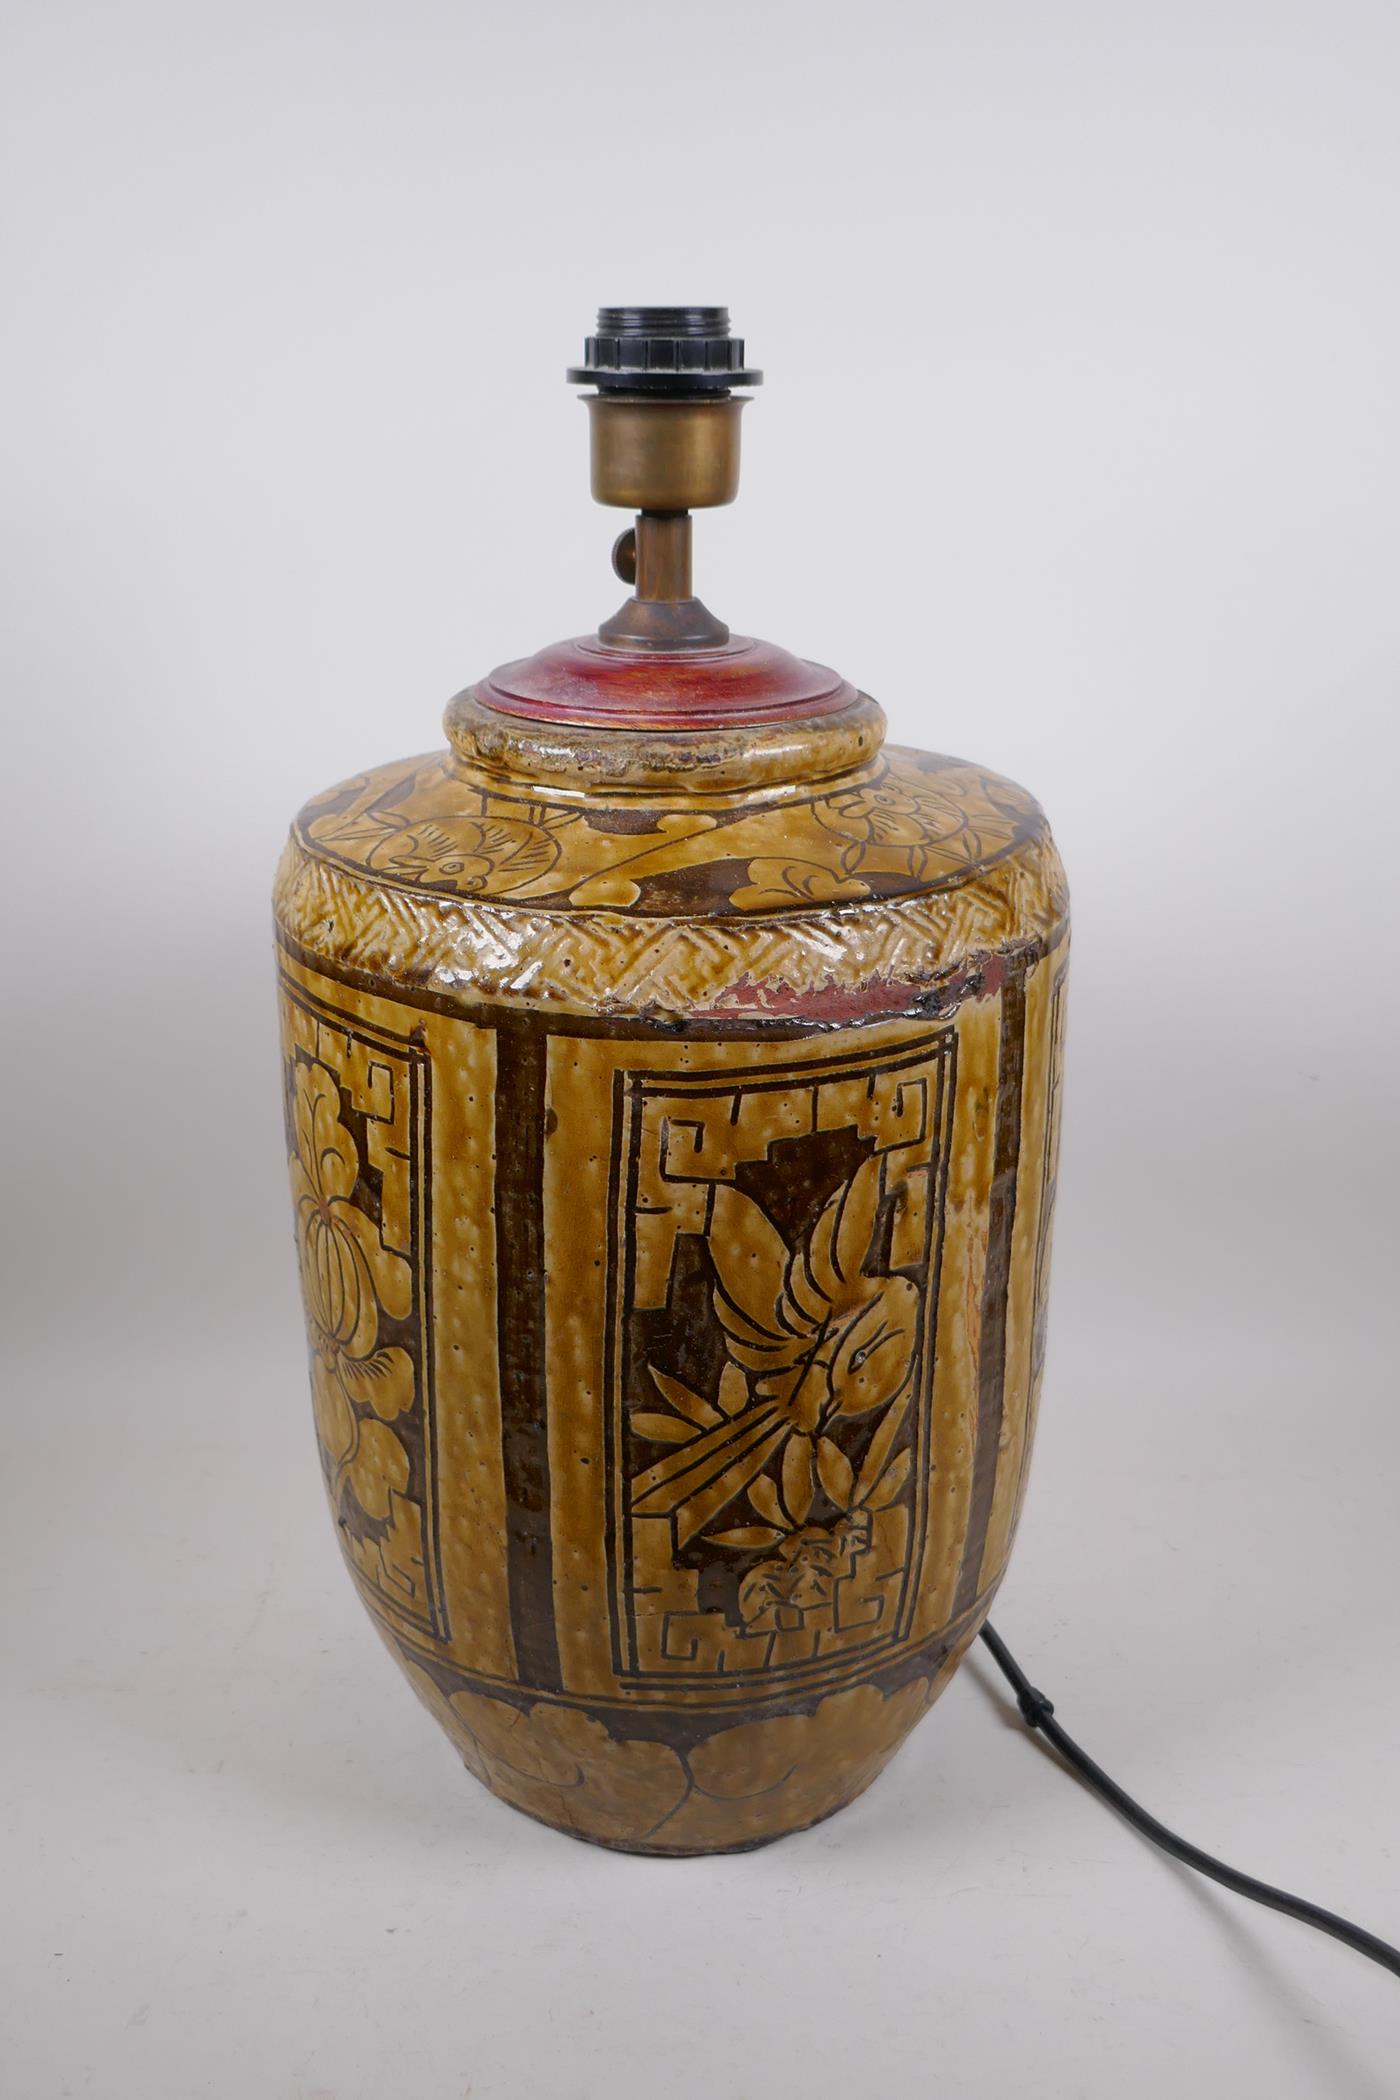 A C19th Chinese Cizhou kiln pottery jar, with decorative floral panels and bats, converted to a - Image 2 of 5